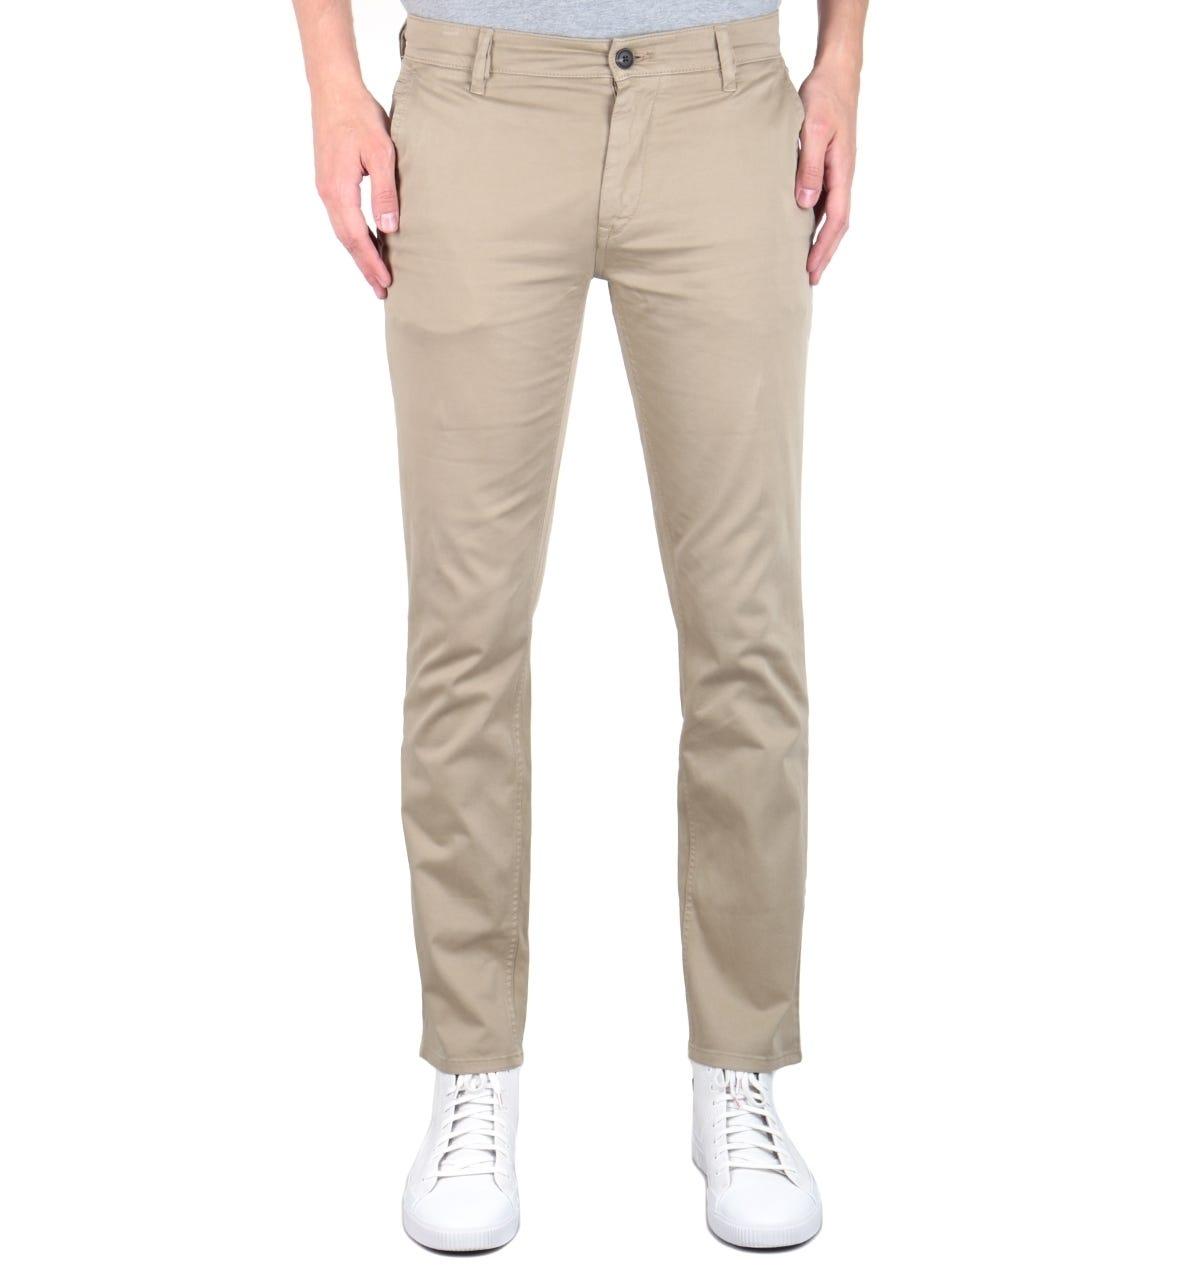 Circus Tranquility Monetary BOSS by HUGO BOSS Cotton Schino-slim D Stone Chinos in Beige (Natural) for  Men - Lyst